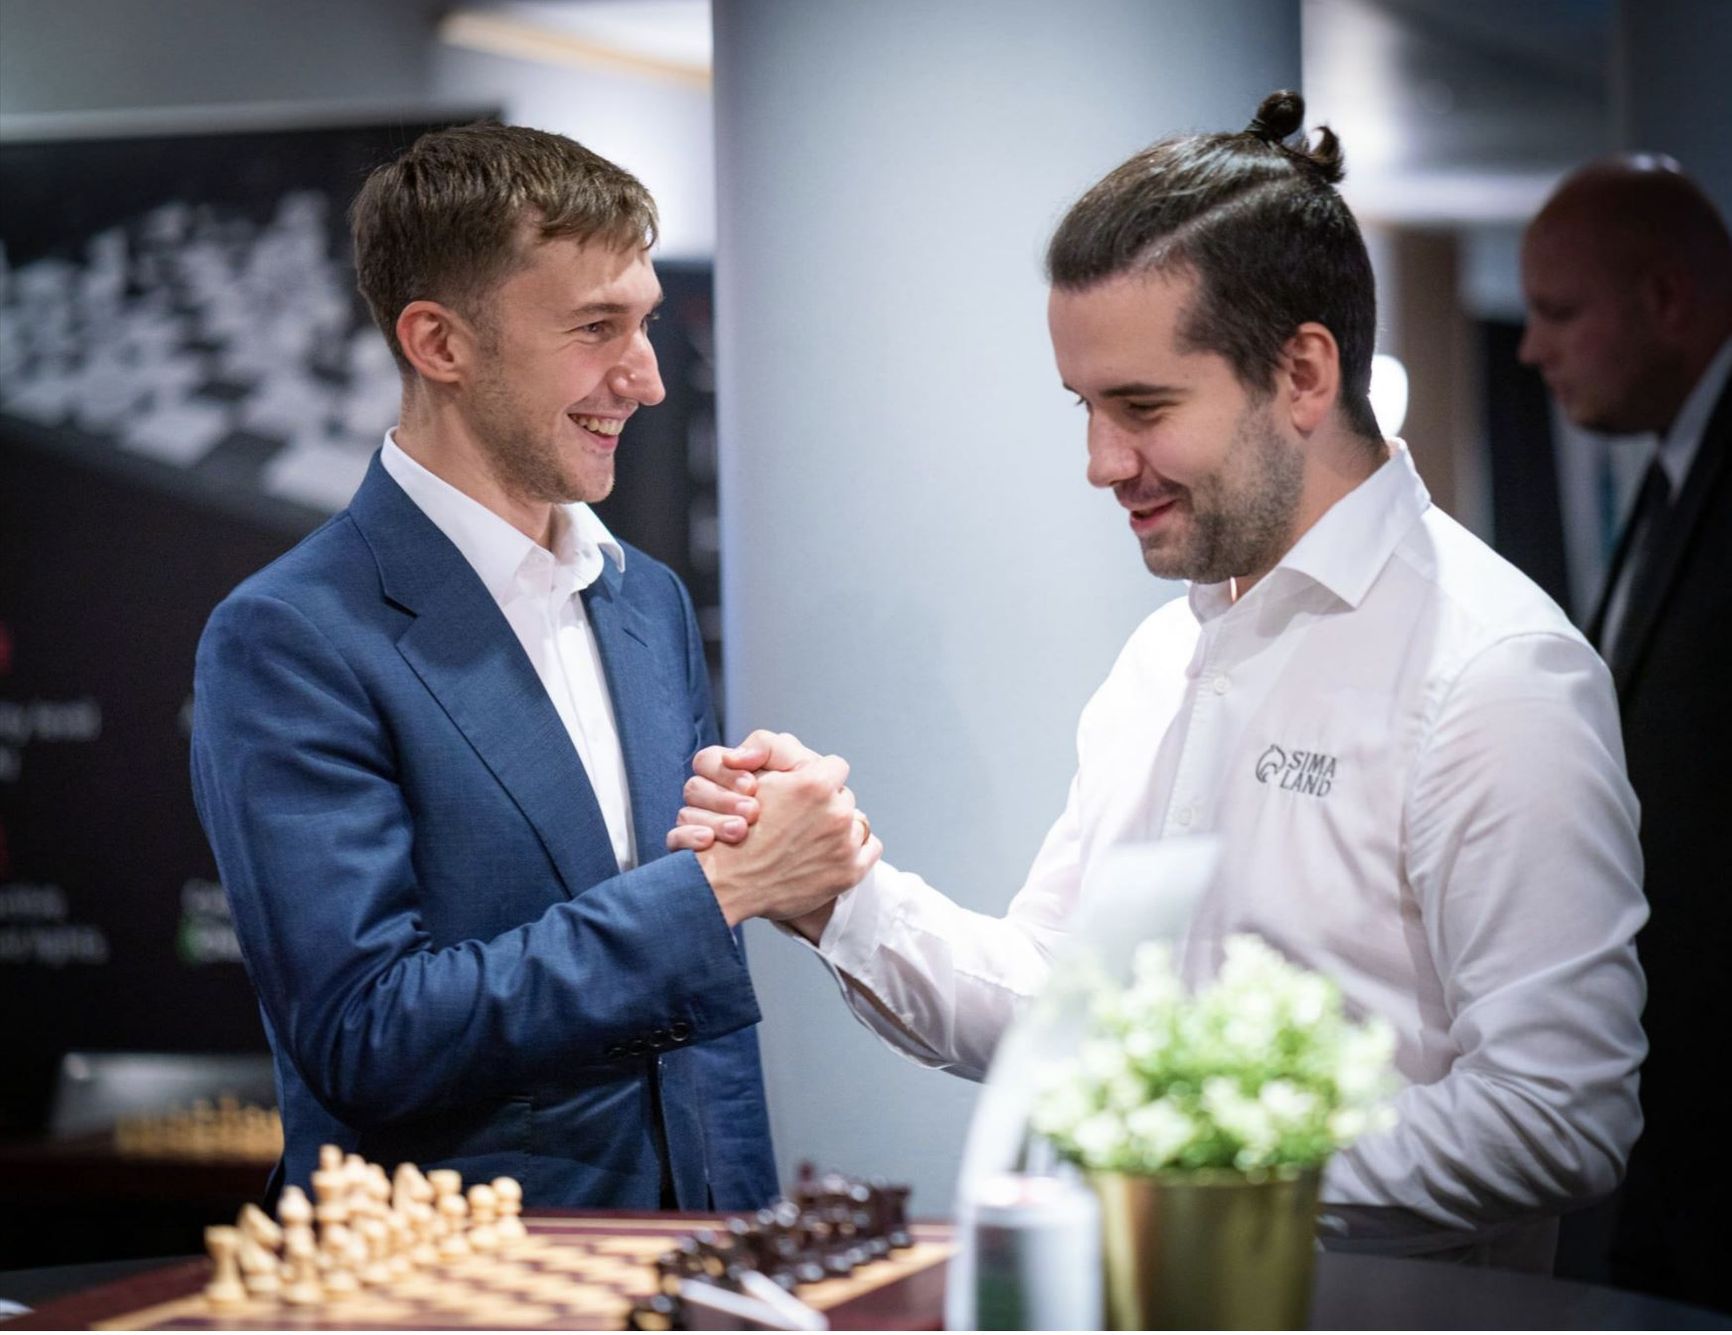 Karjakin and Nepomniachtchi before parting ways over politics